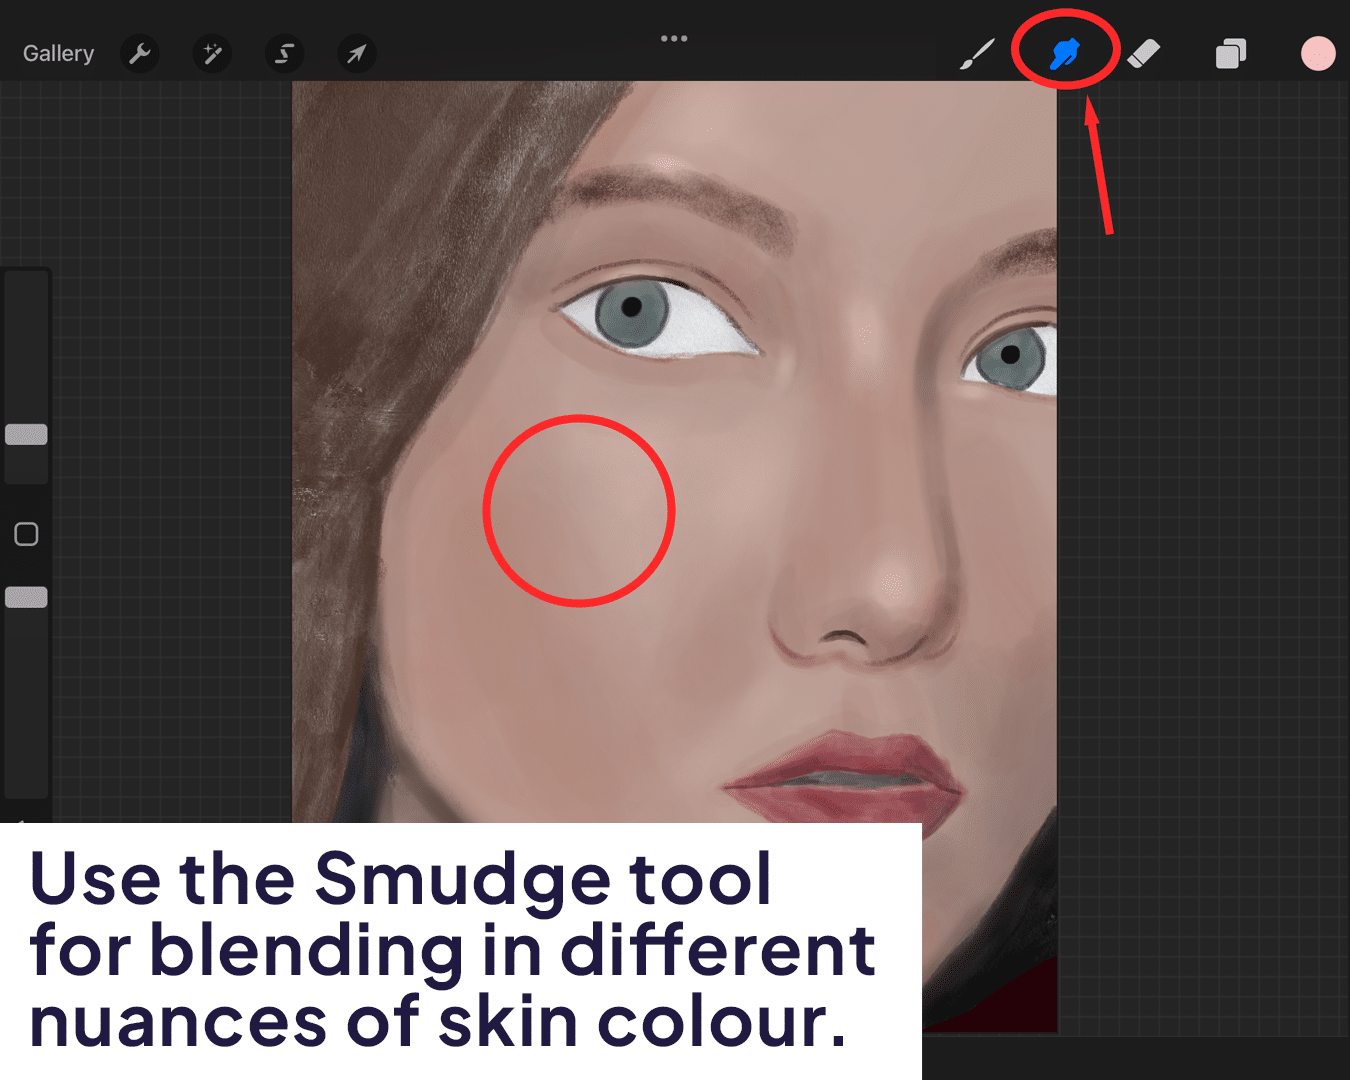 Using Smudge tool